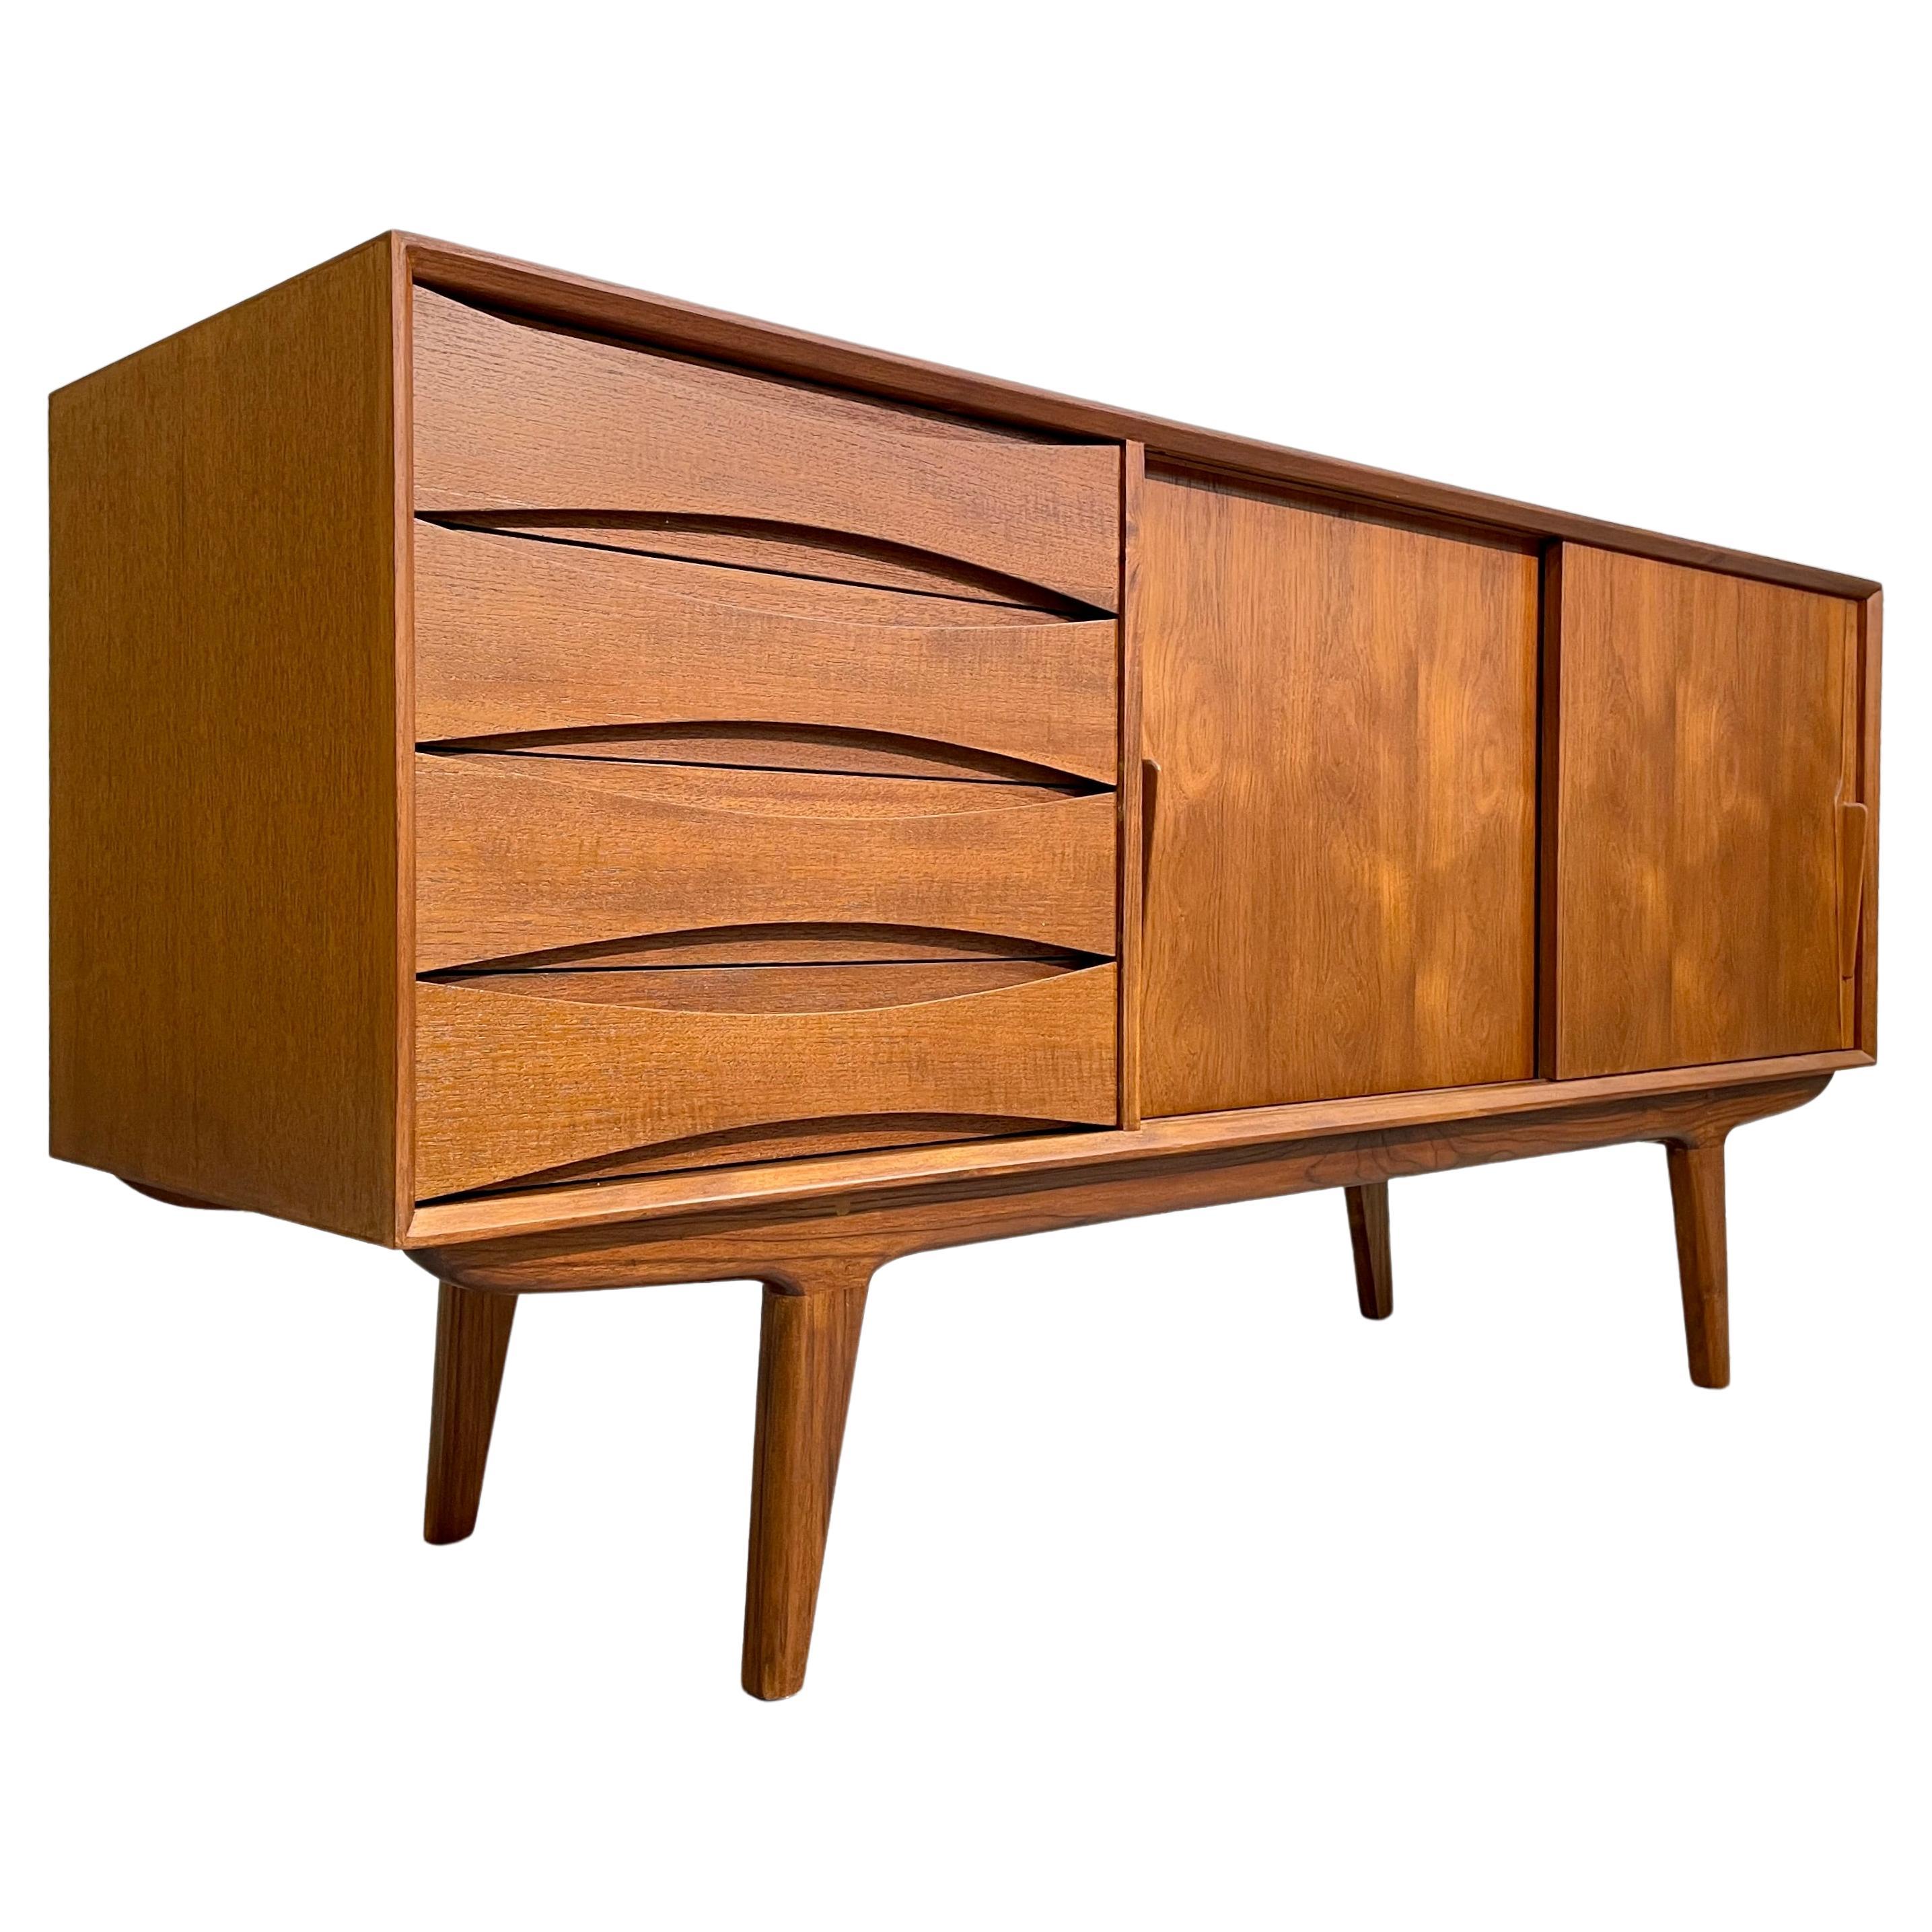  Handsome Mid Century MODERN styled SIDEBOARD / CREDENZA media stand For Sale